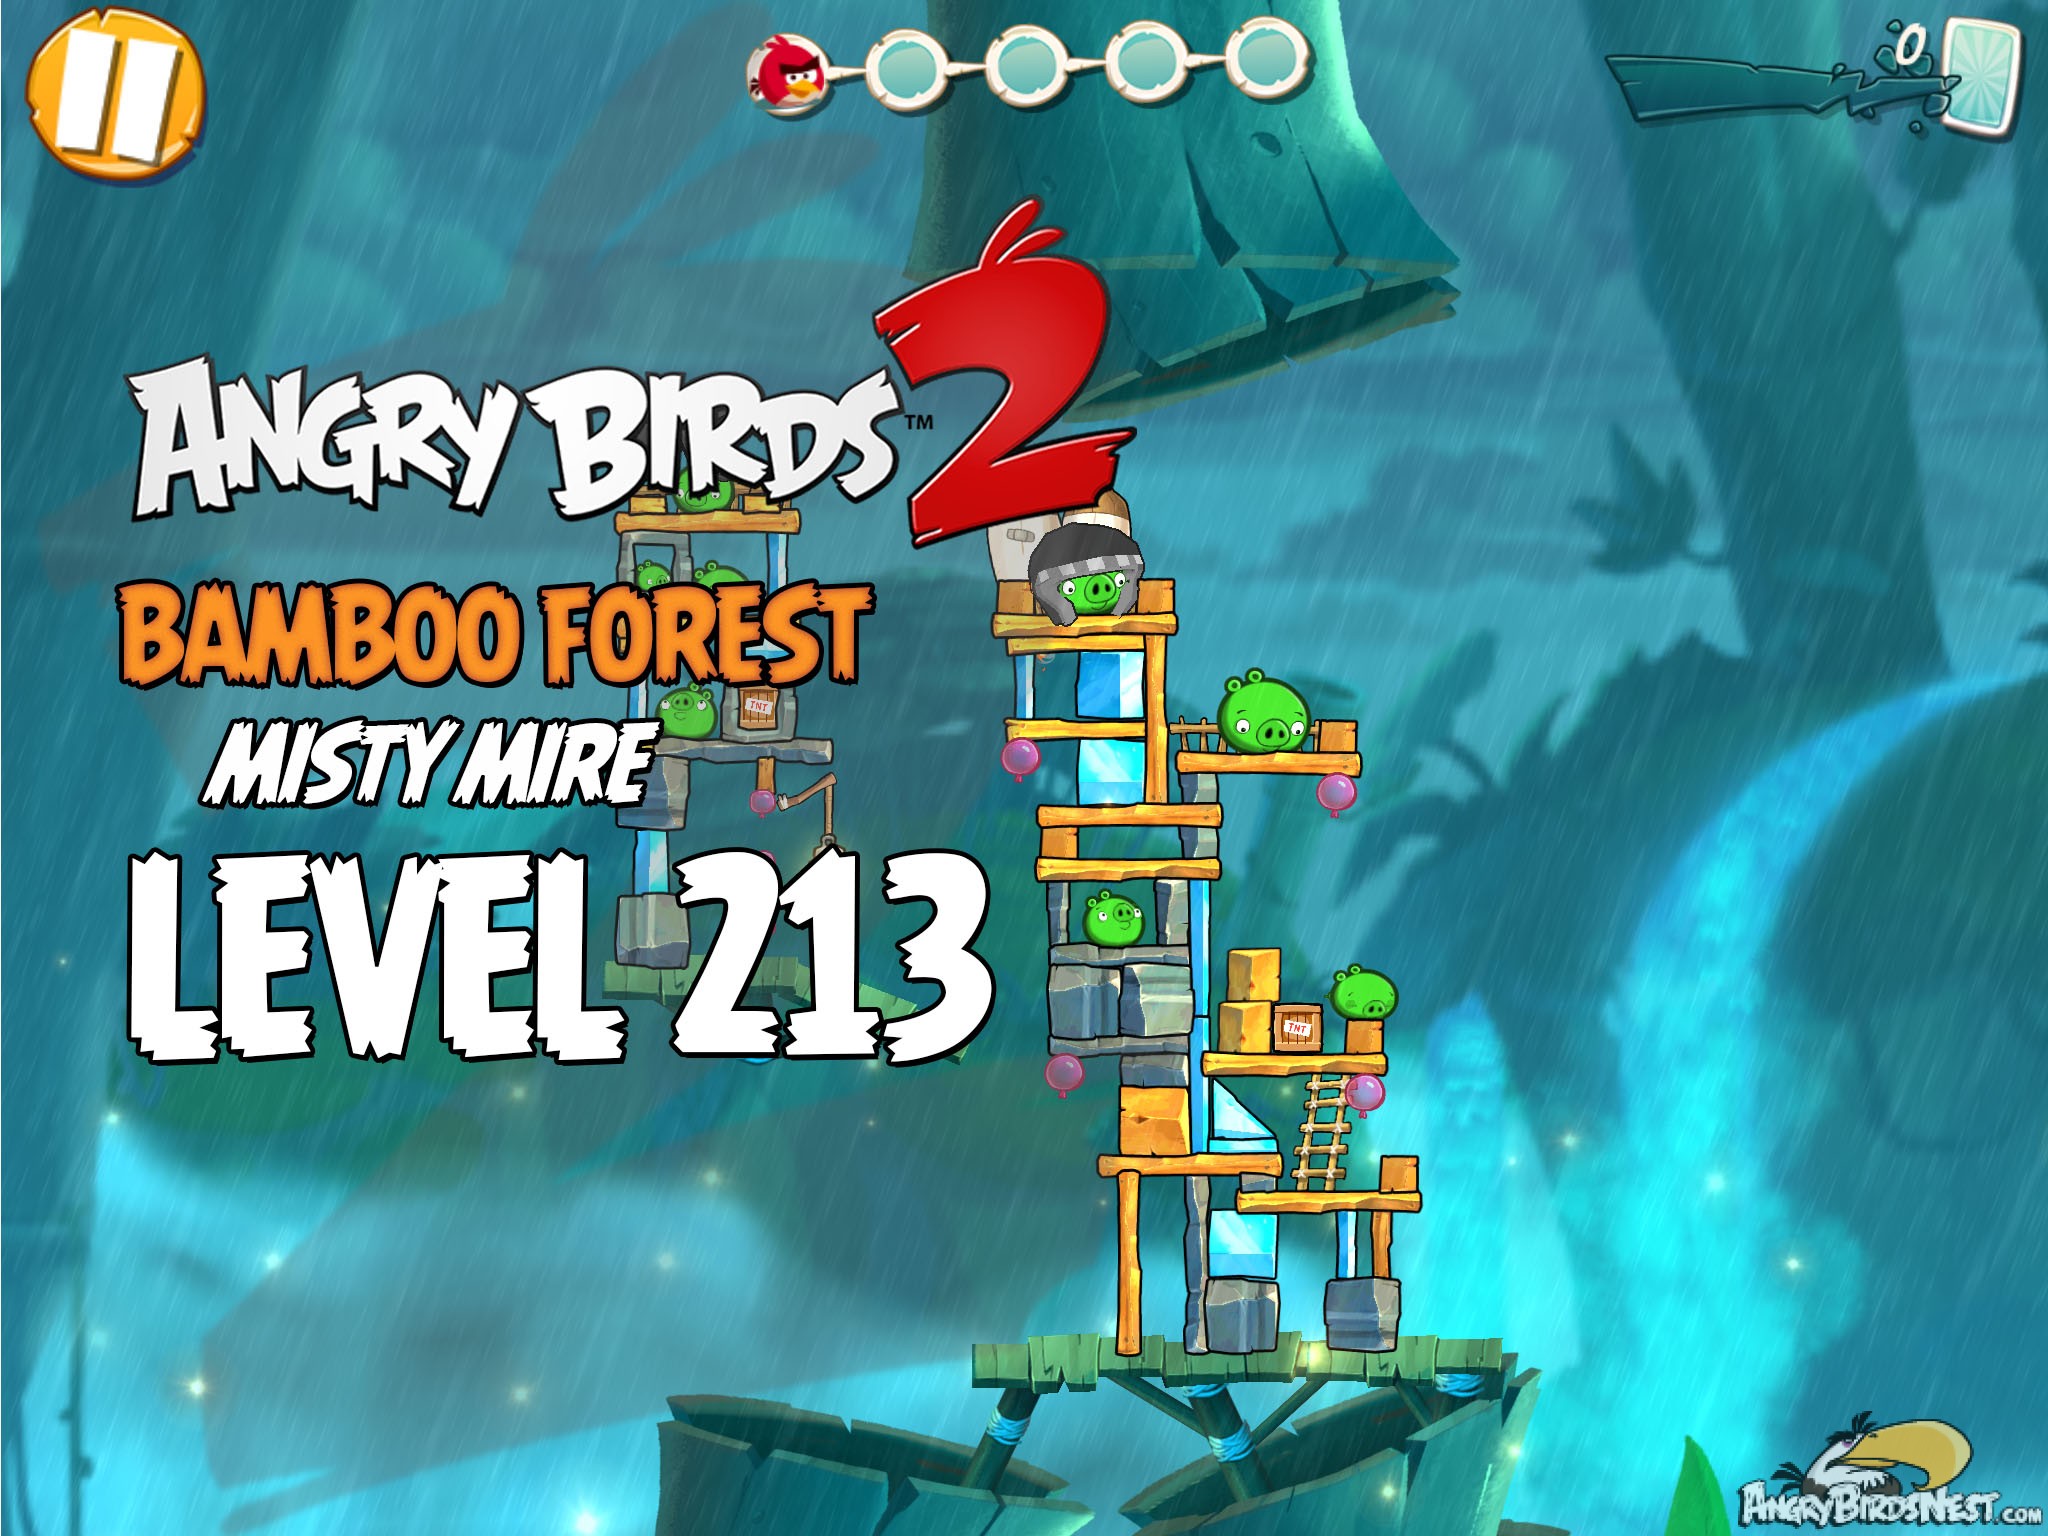 Angry Birds 2 Bamboo Forest Misty Mire Level 213